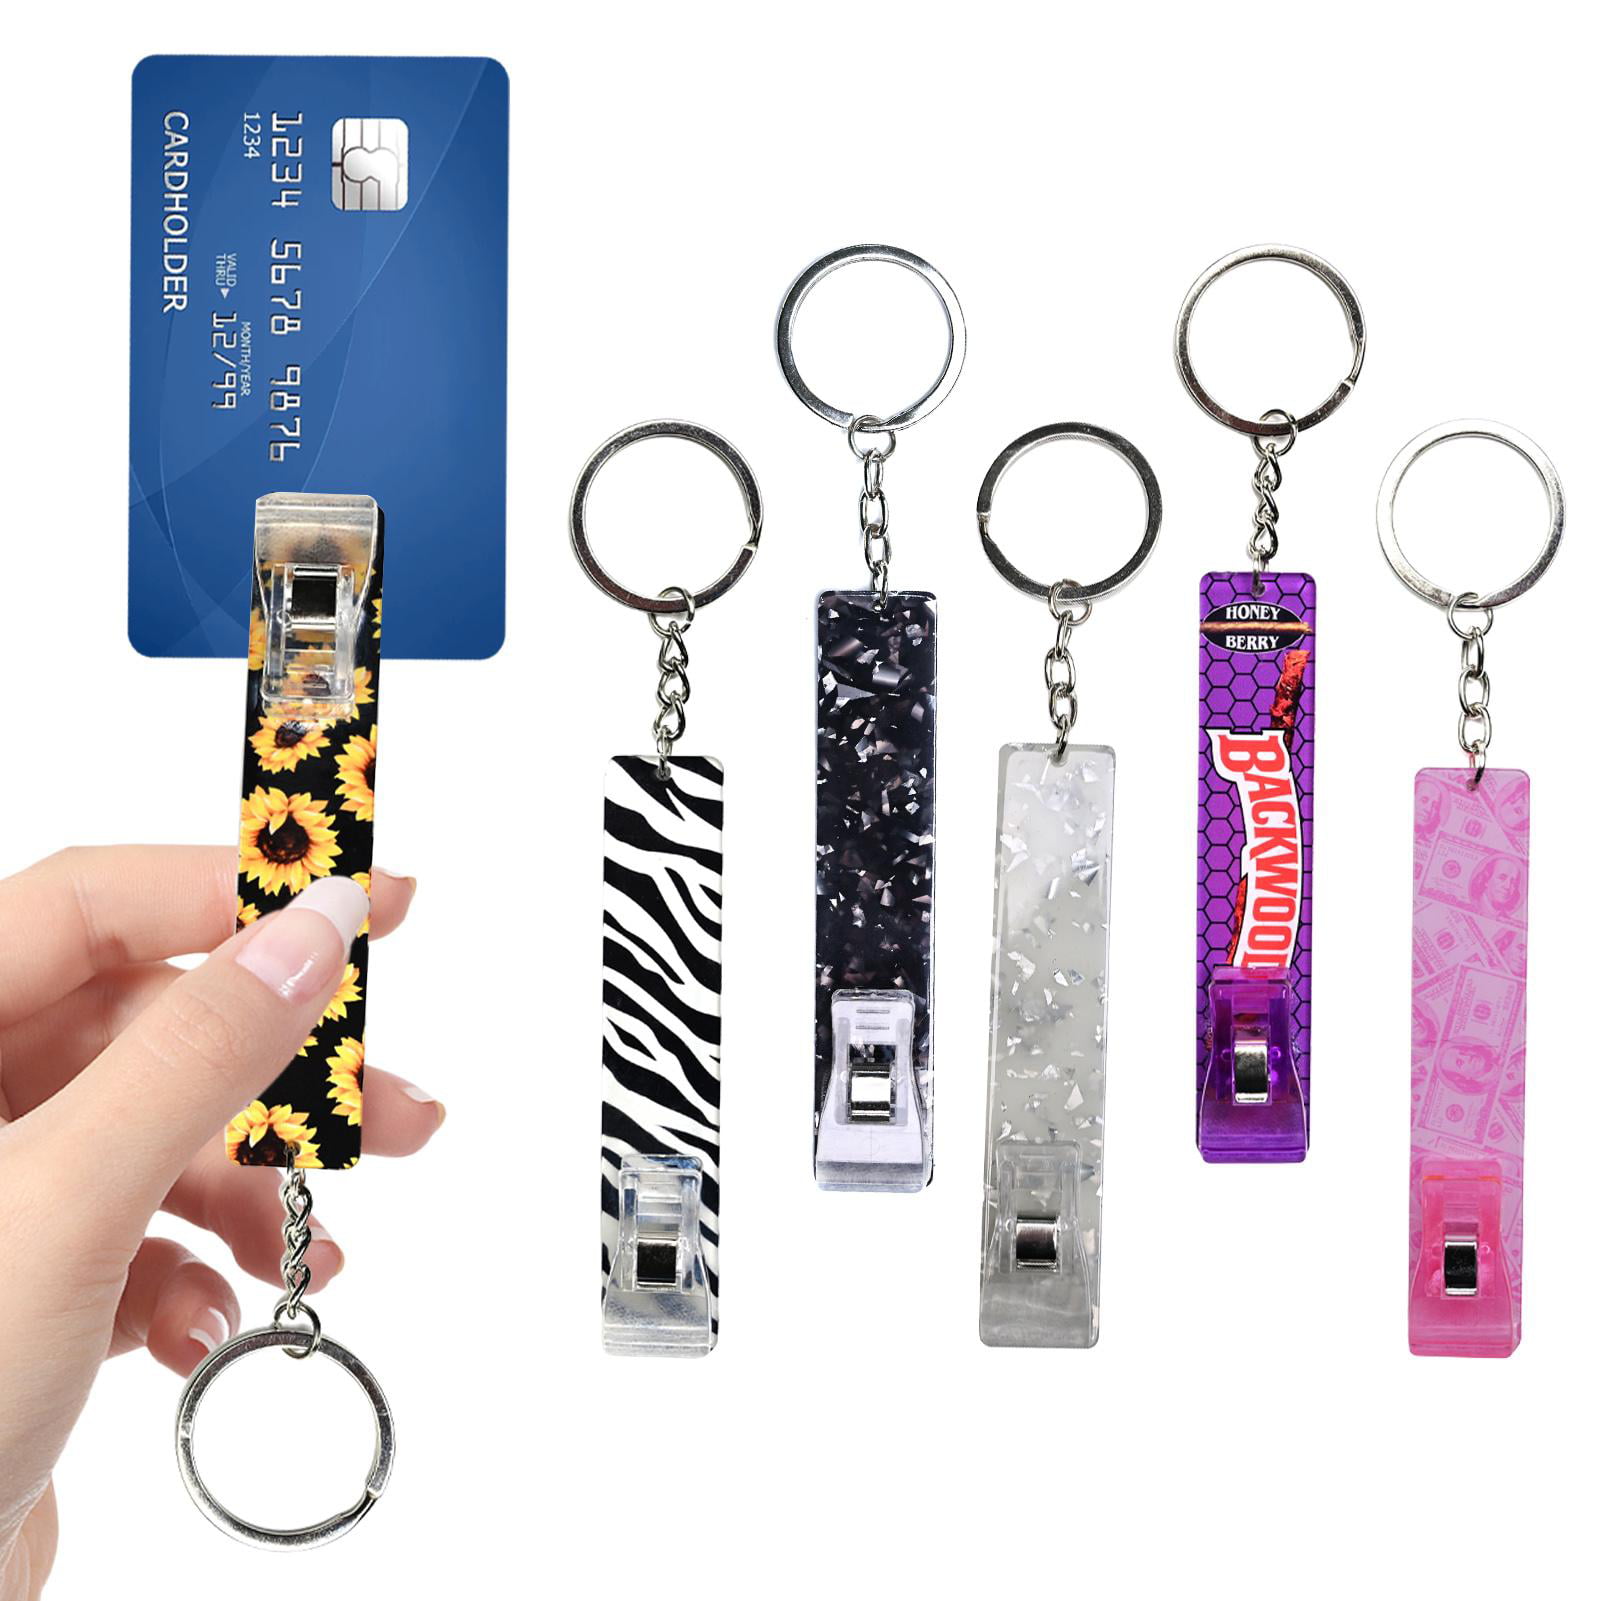 Key chain to remove Credit Cards from ATM Machine